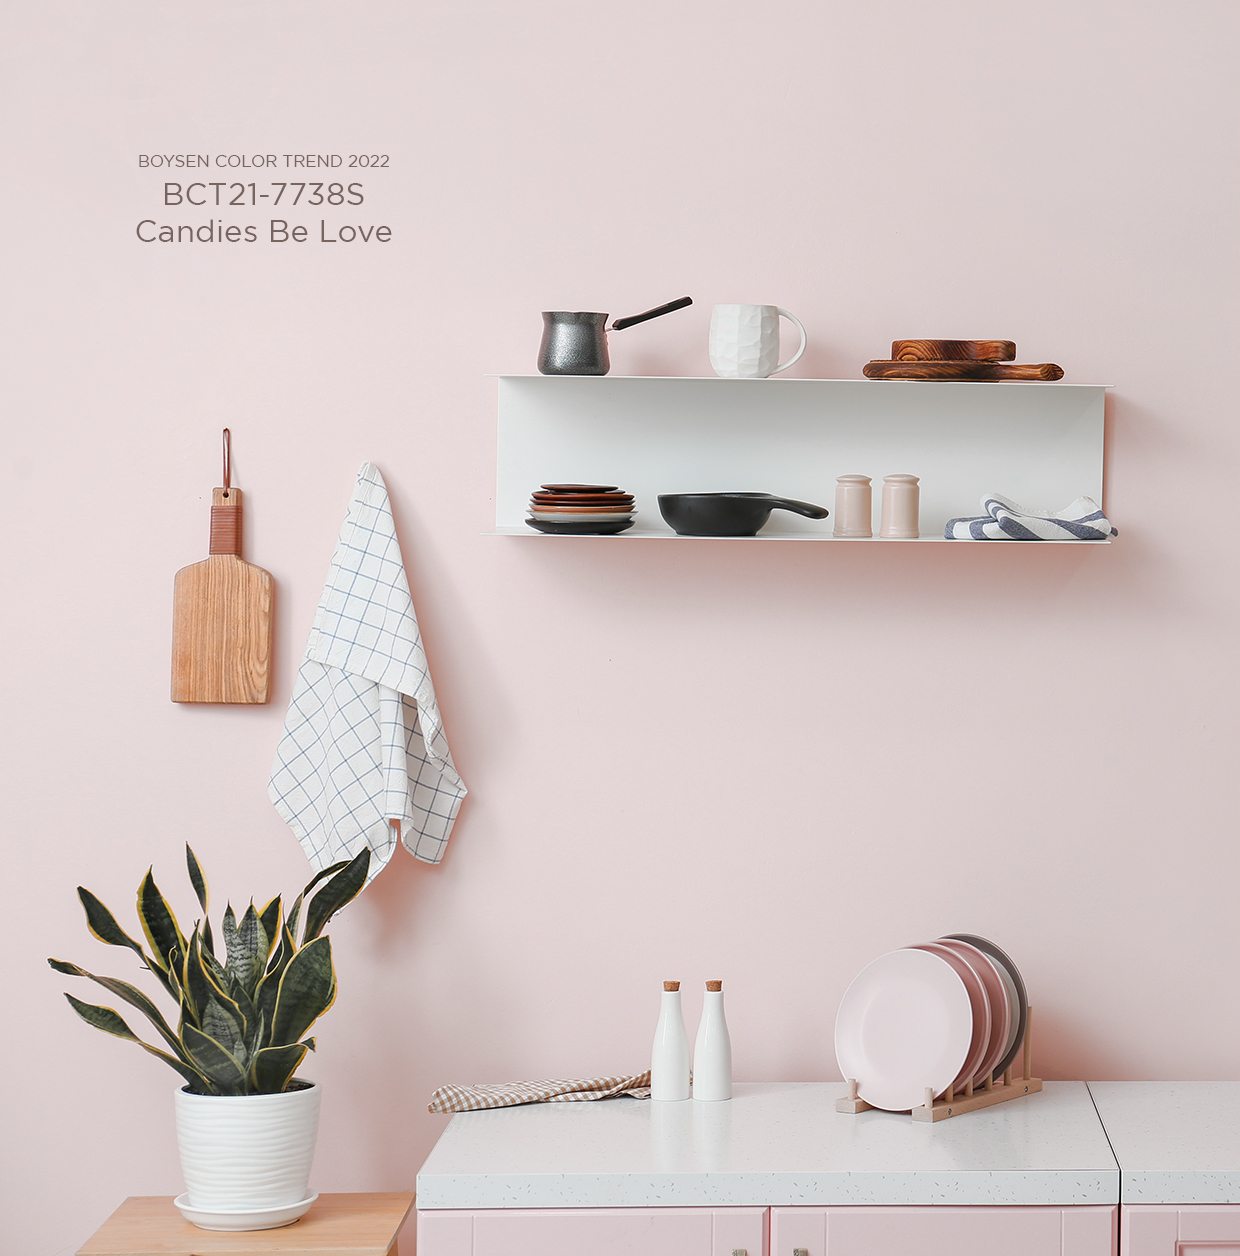 A Color Palette for Different Parts of the Home | MyBoysen